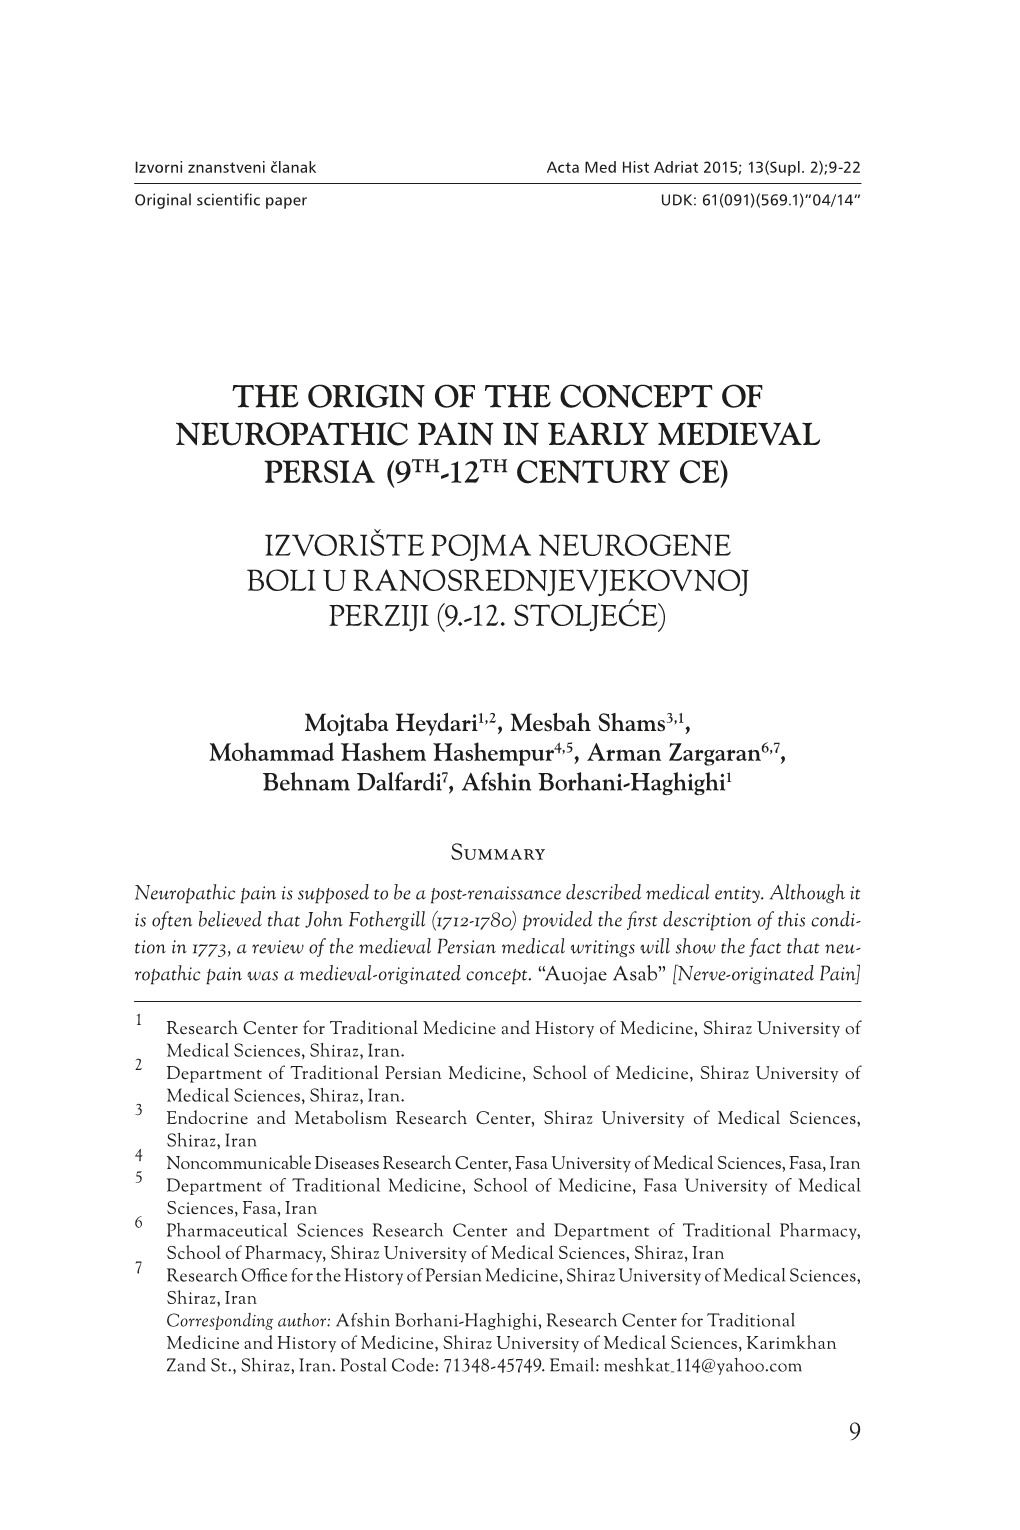 The Origin of the Concept of Neuropathic Pain in Early Medieval Persia (9Th-12Th Century Ce)